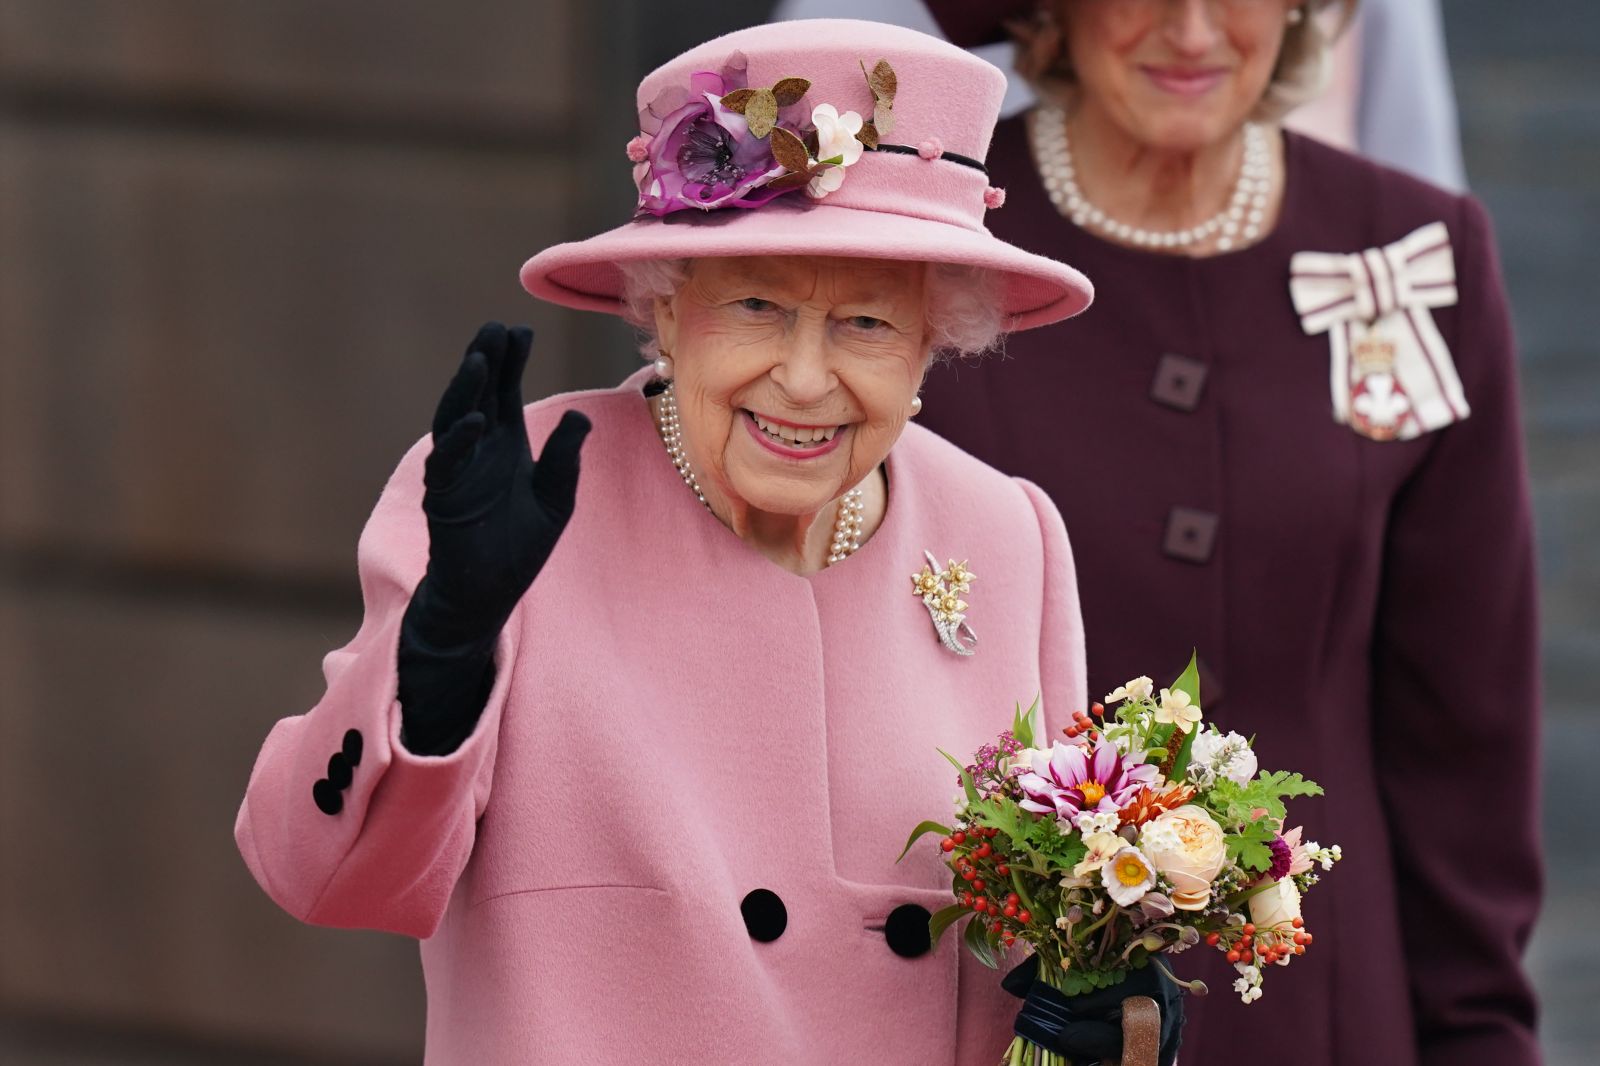 Photograph of the Queen